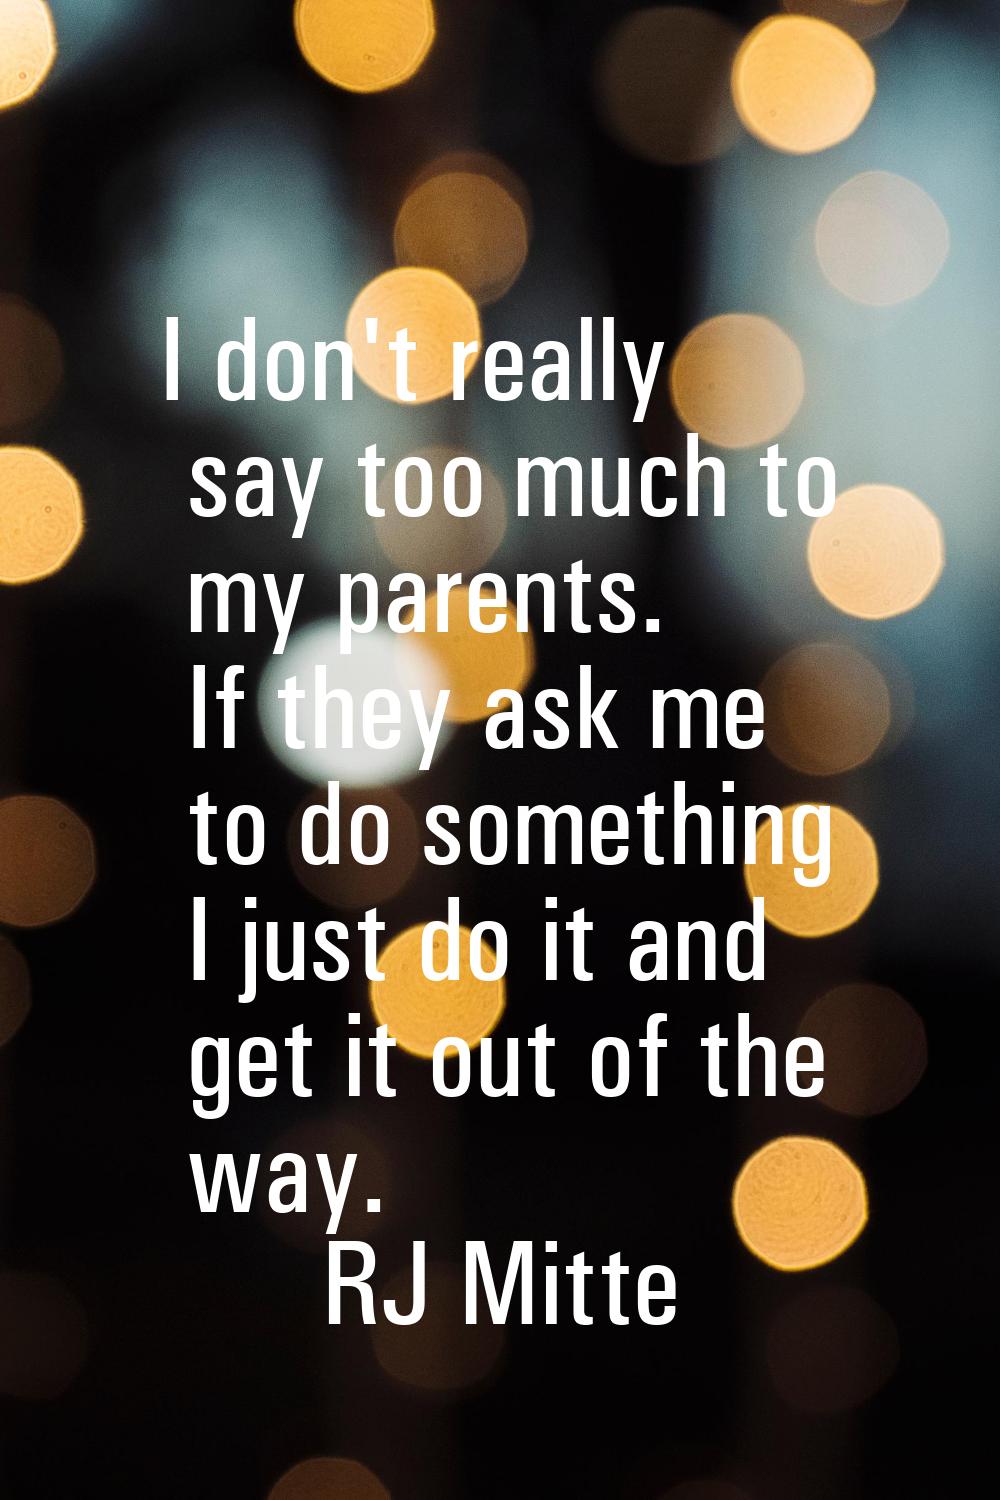 I don't really say too much to my parents. If they ask me to do something I just do it and get it o